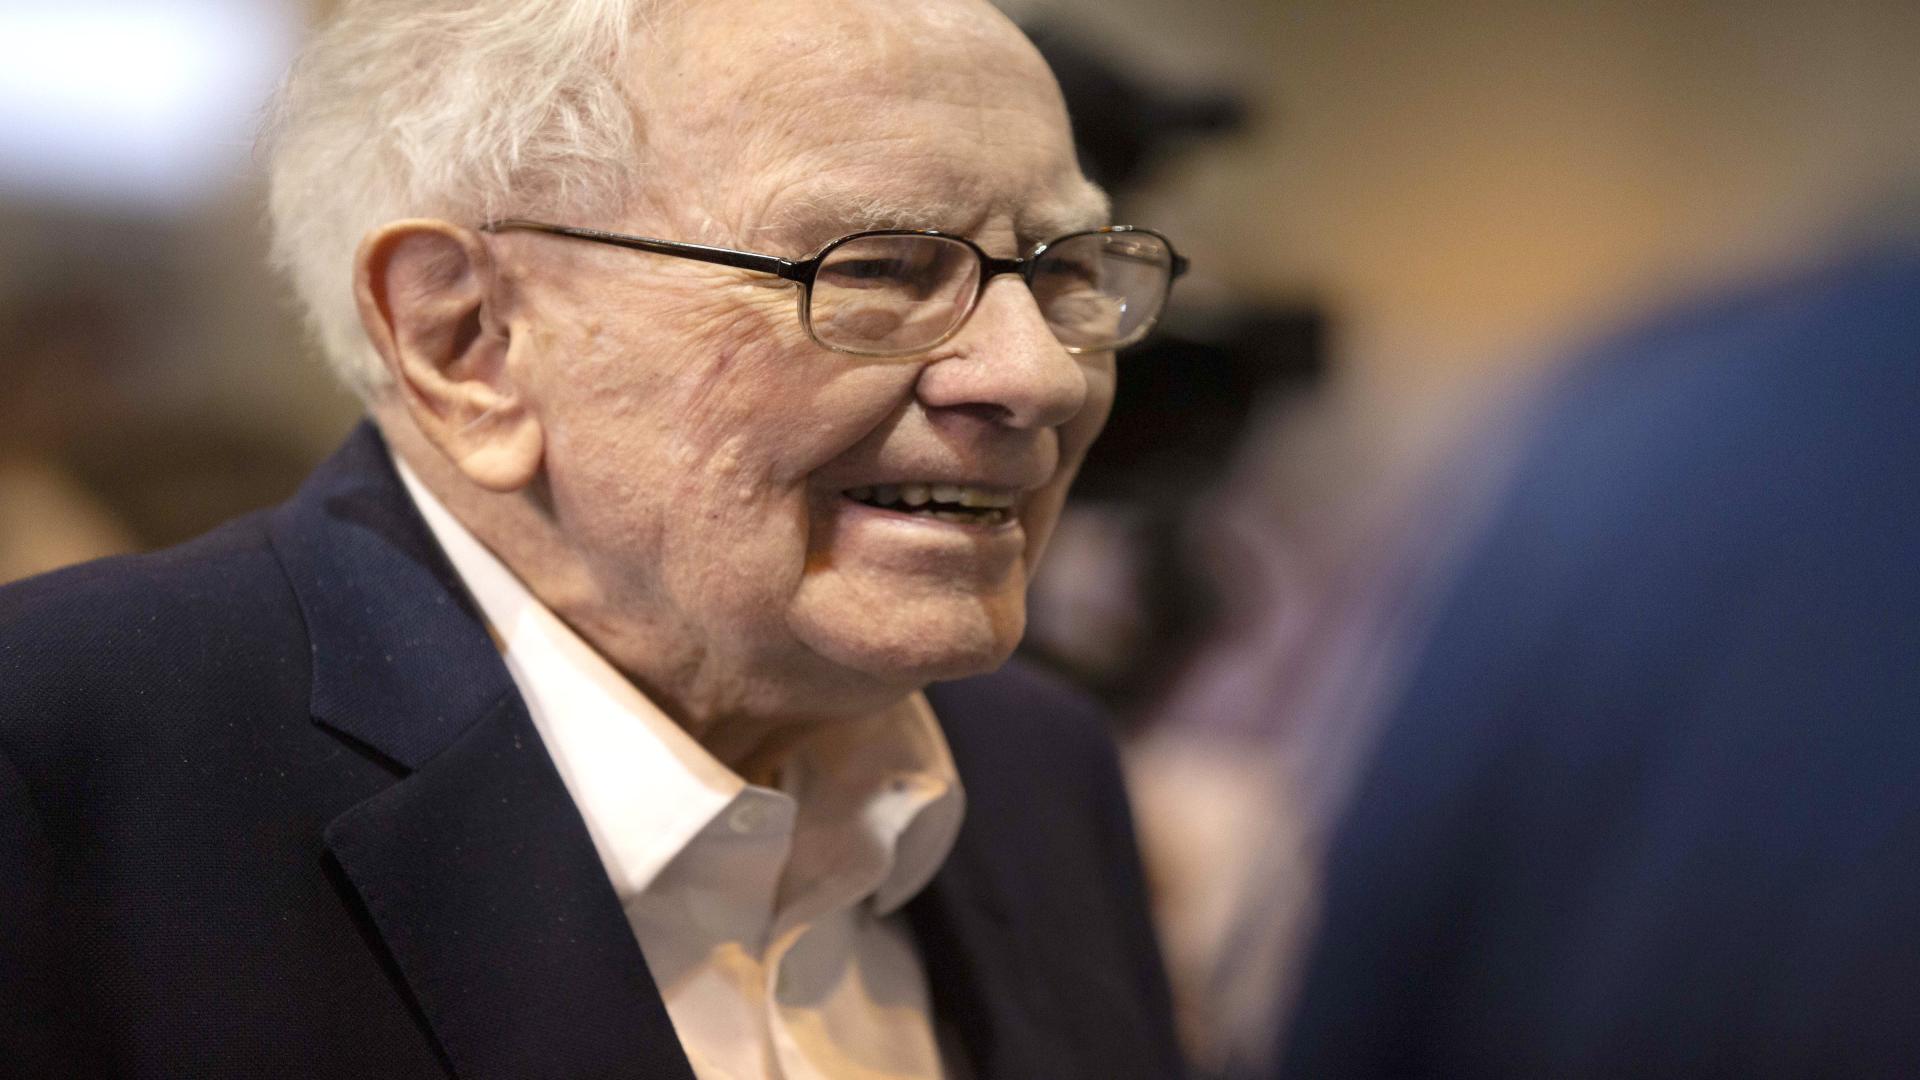 Warren Buffett says Berkshire Hathaway is looking at an investment in Canada